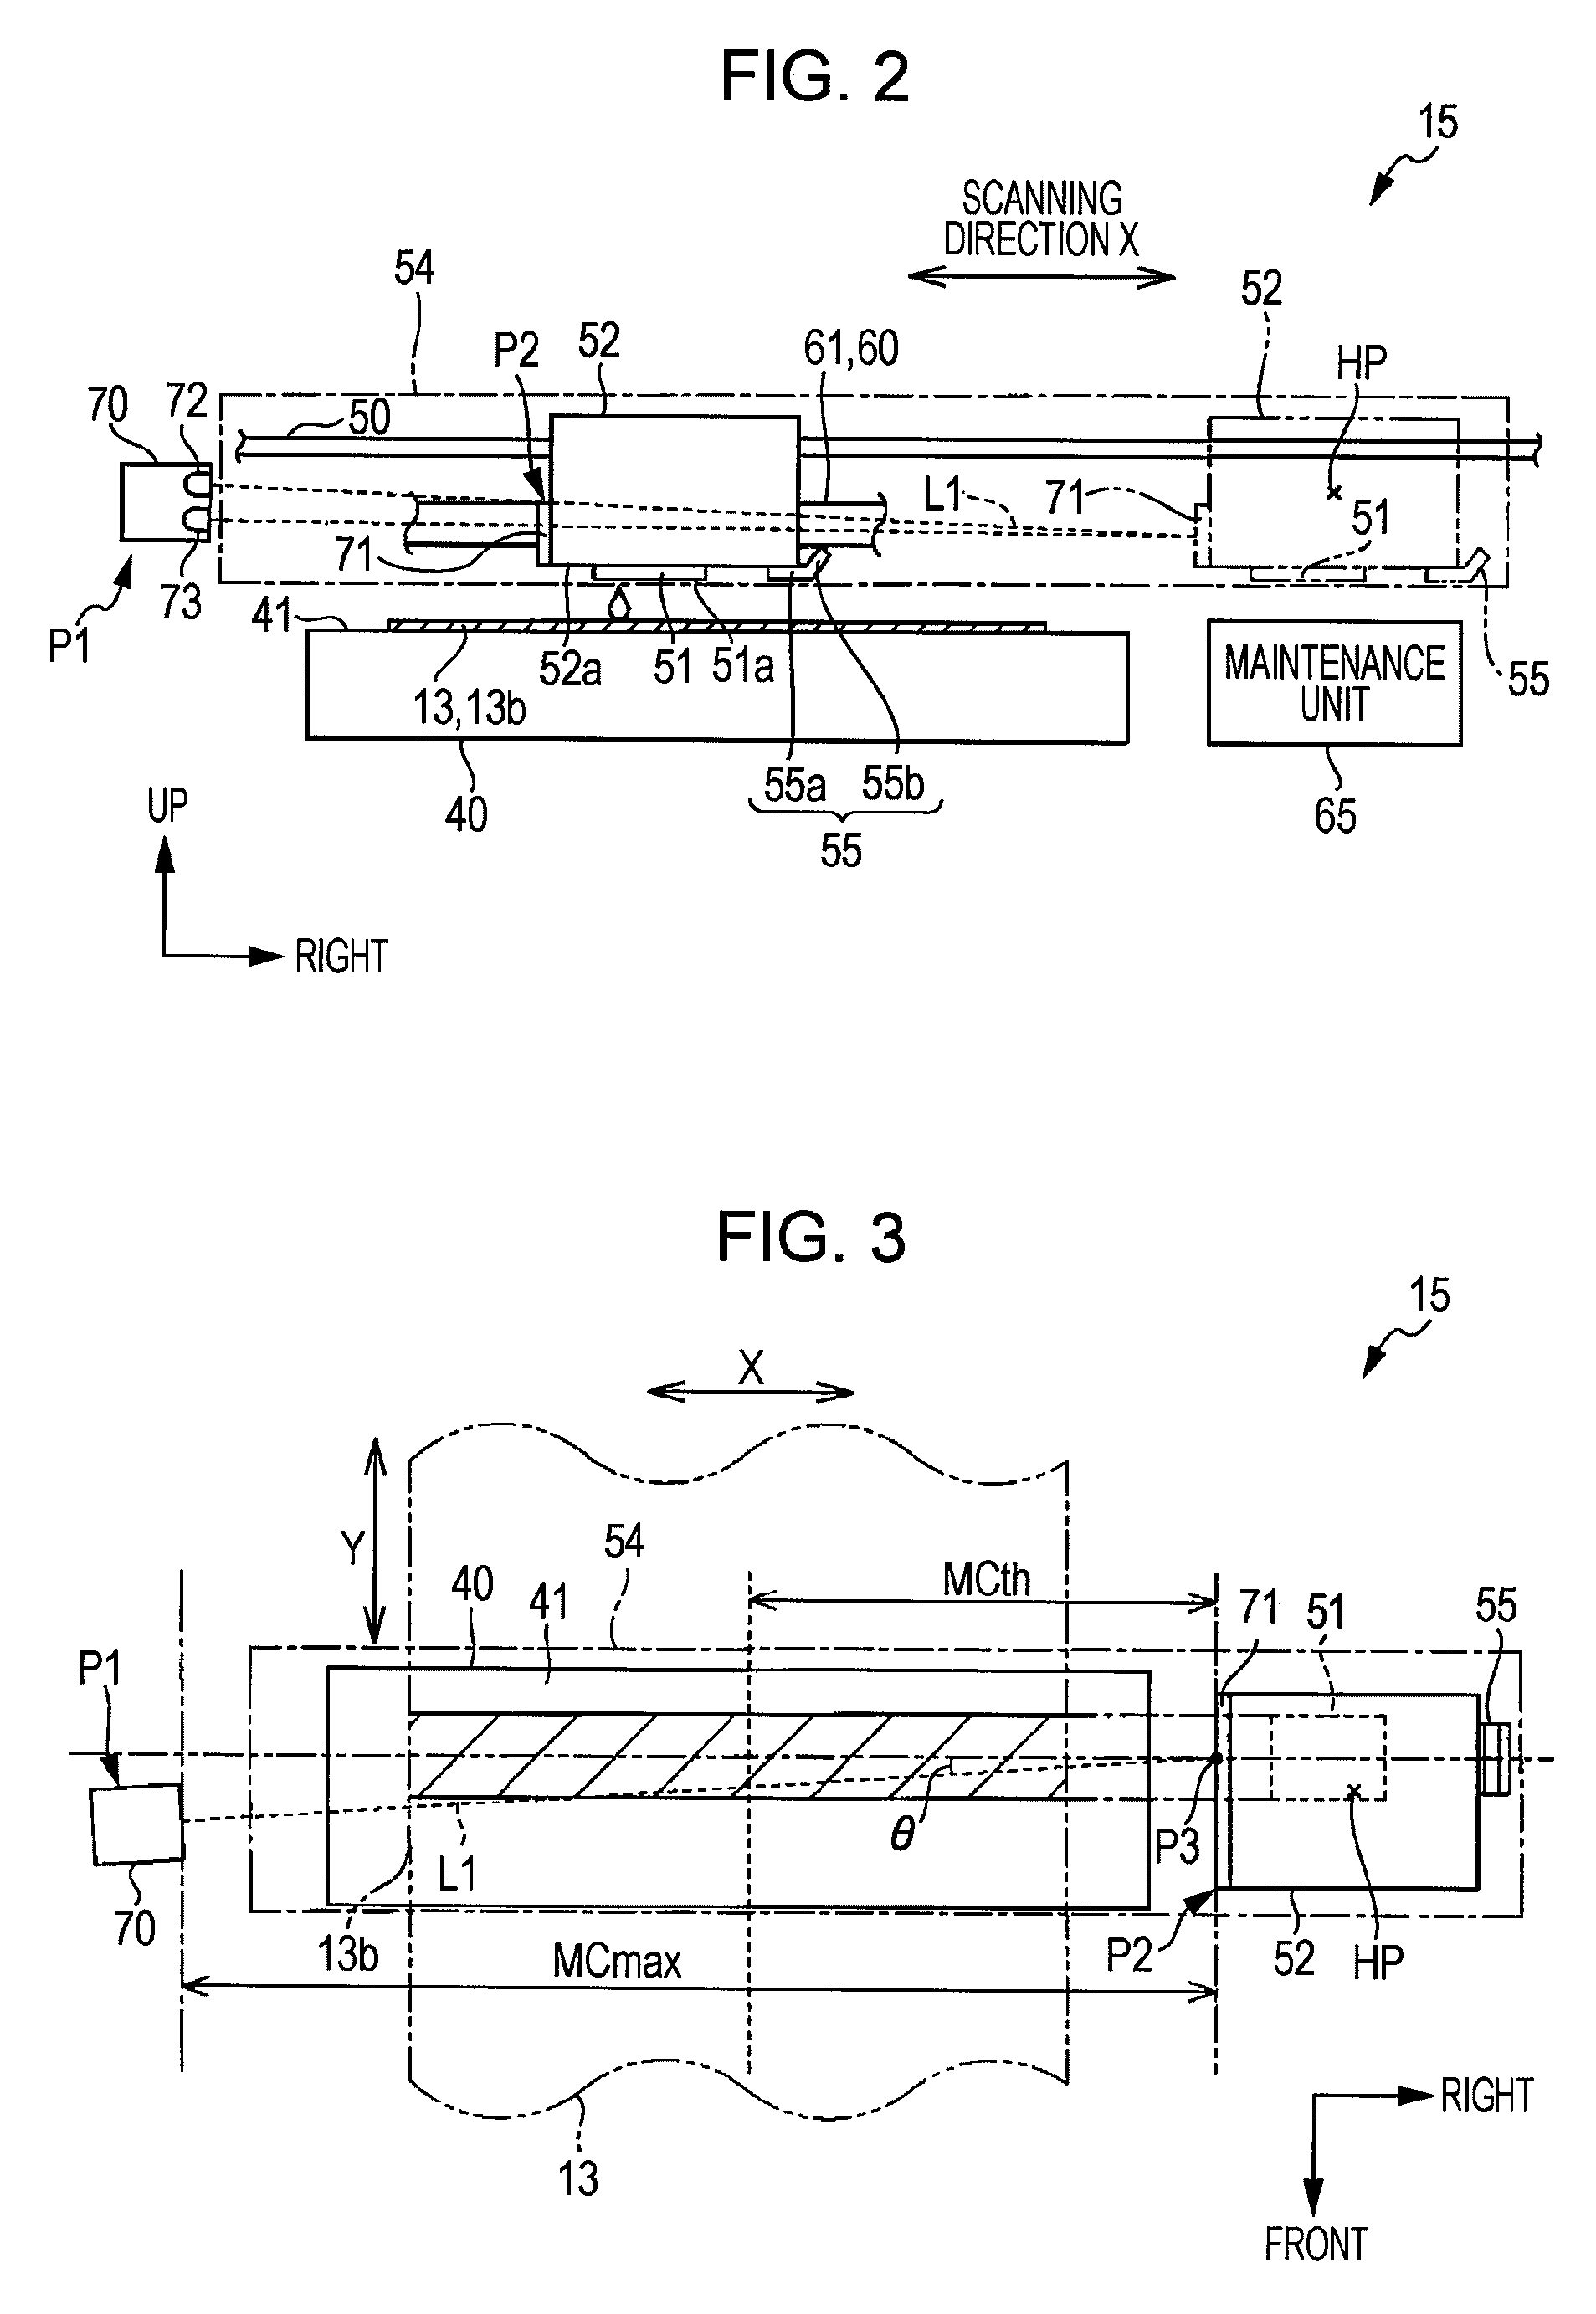 Liquid ejecting apparatus having a light sensor for detecting when a recording medium is raised from a support unit